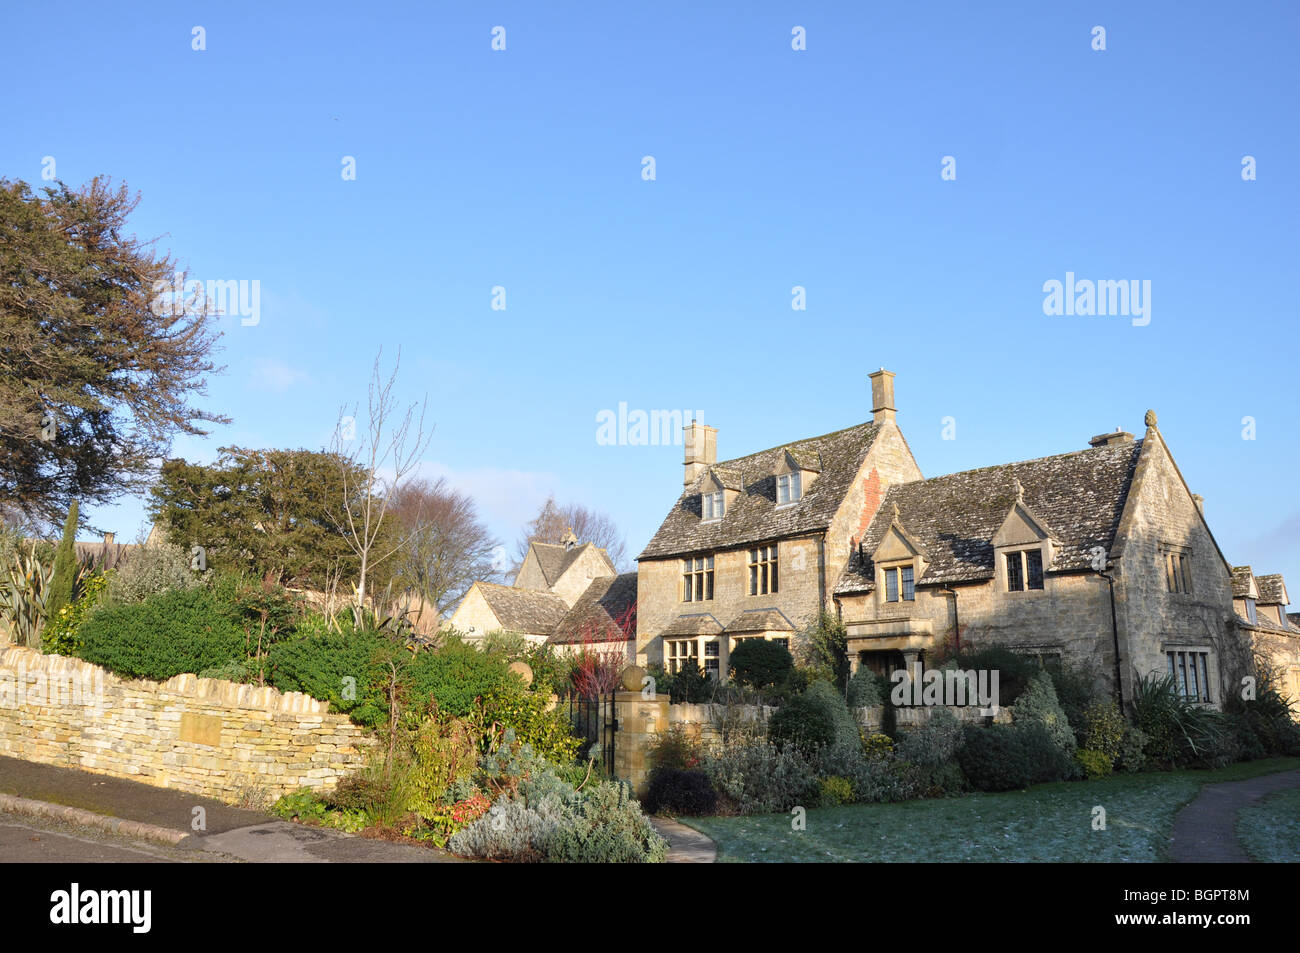 Large house in Chipping Campden Stock Photo